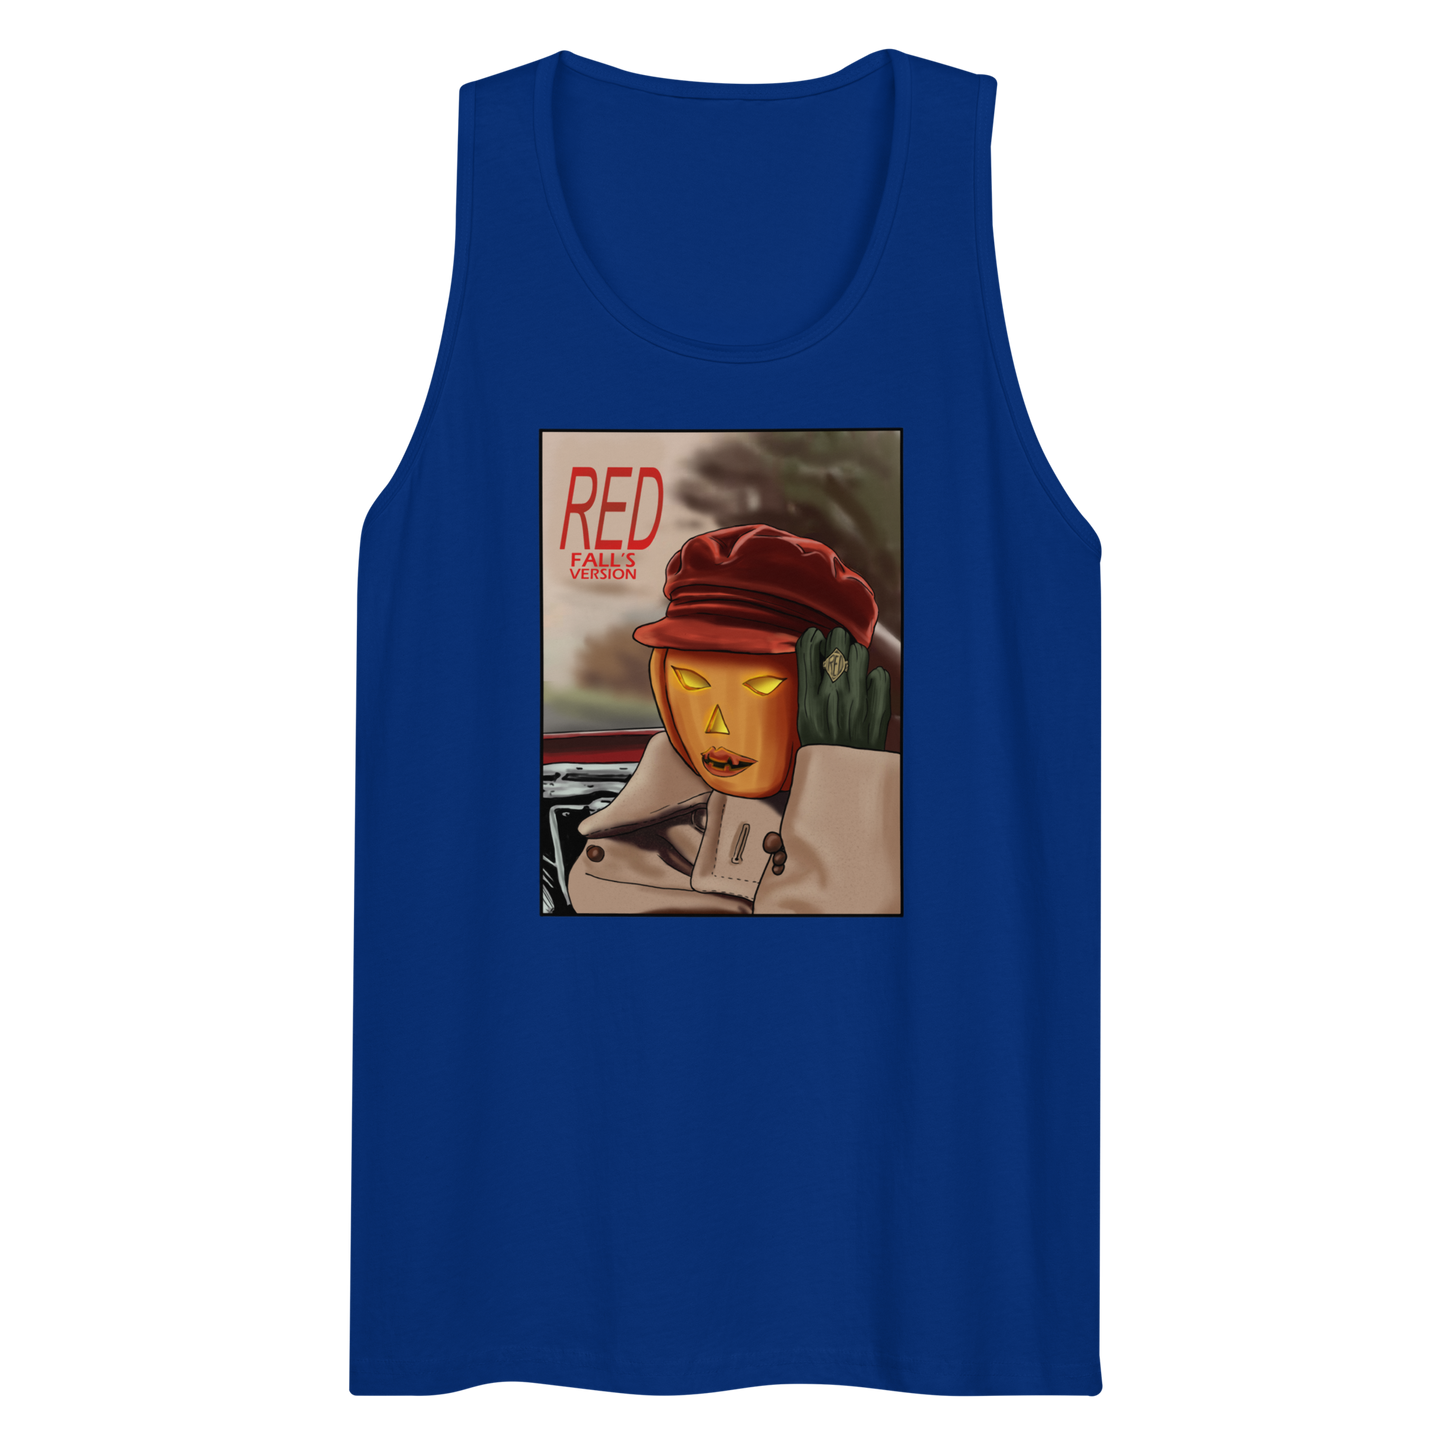 Red (Autumn’s Version) Tank Top